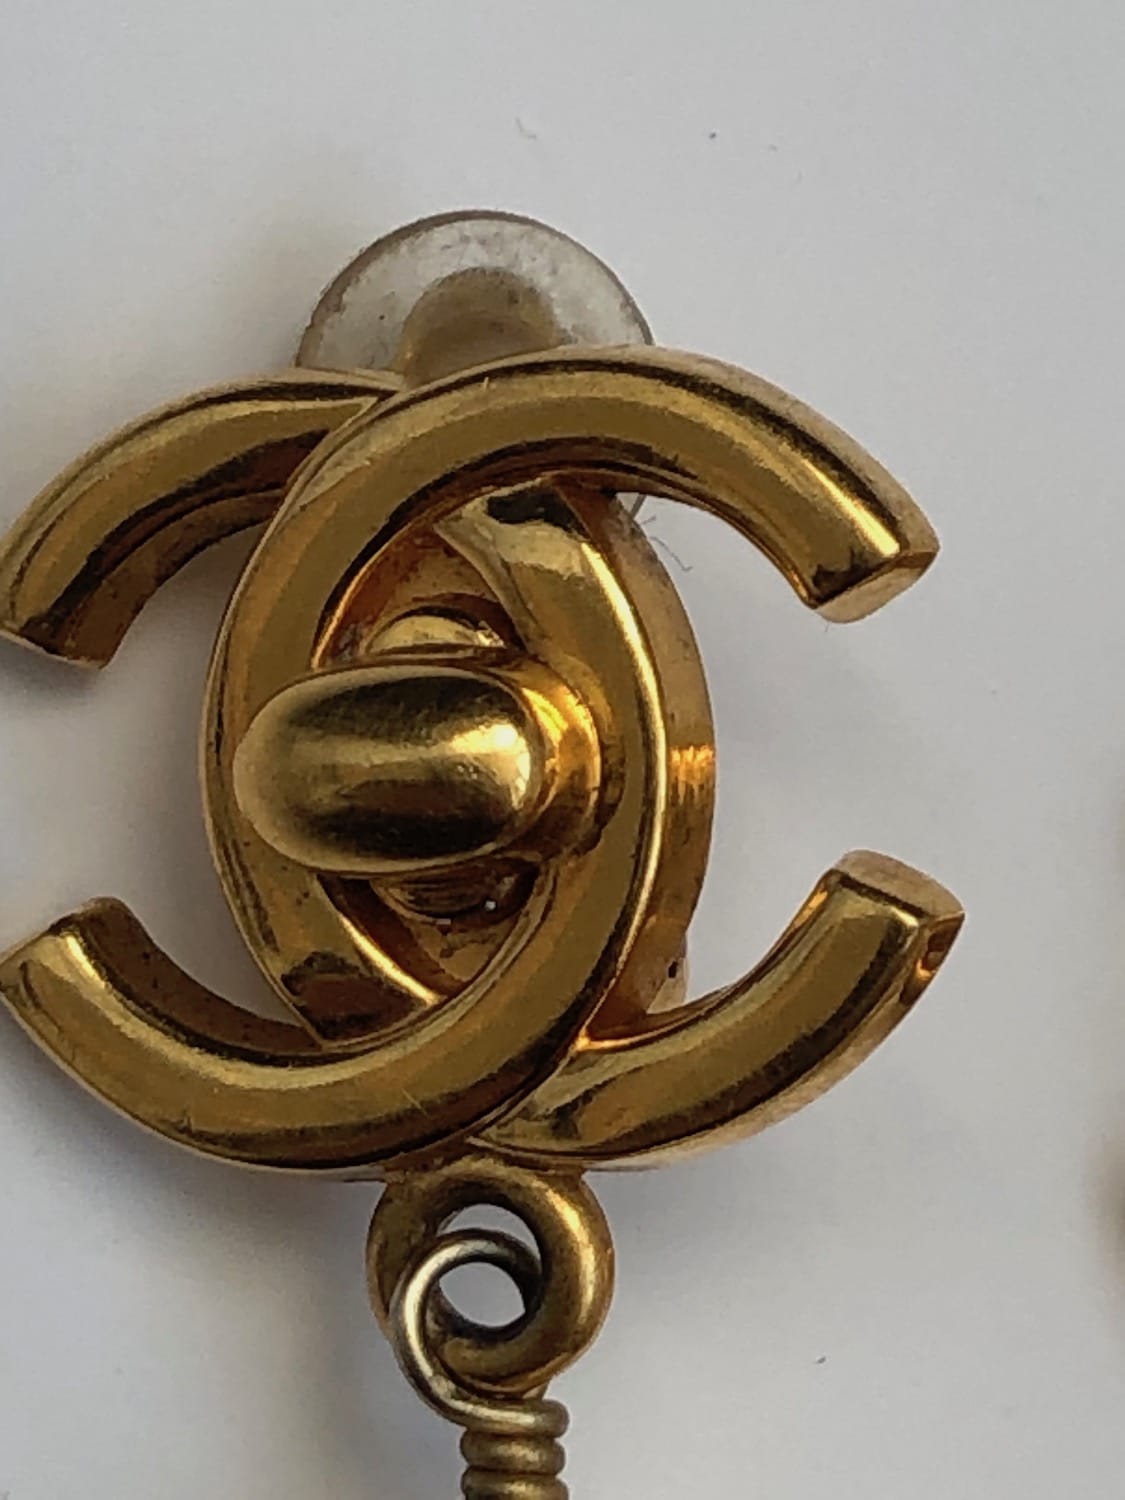 Sold at Auction: CHANEL, LARGE Chanel CC Logo Gold/Black Brooch  w/Dangling Charms!